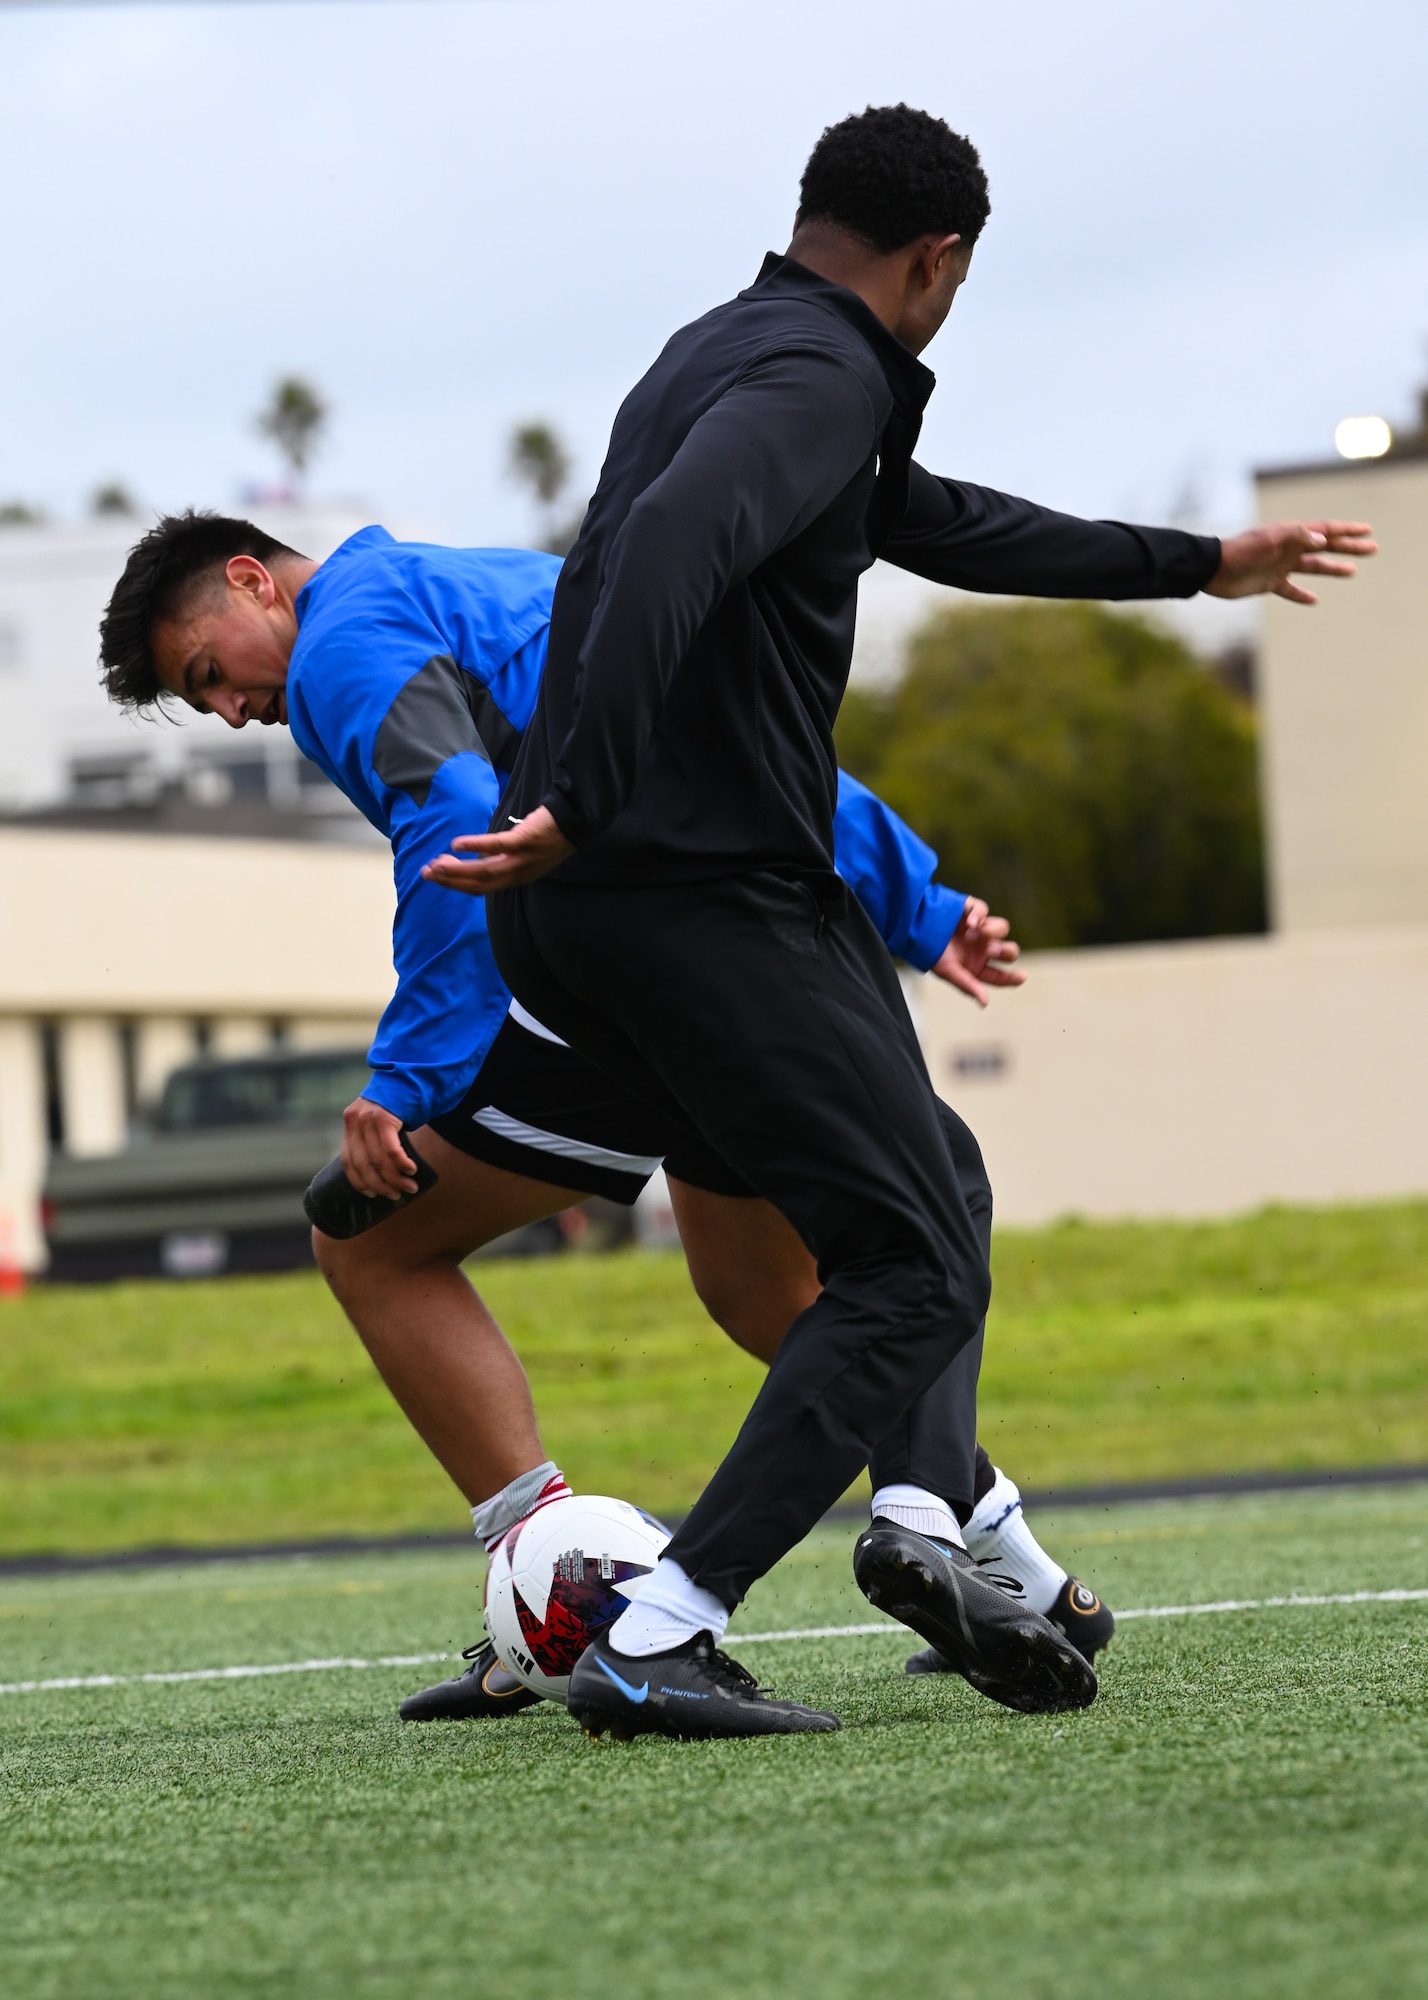 The Department of the Air Force’s Men’s Soccer Team Hosts 2023 Tryouts at Vandenberg